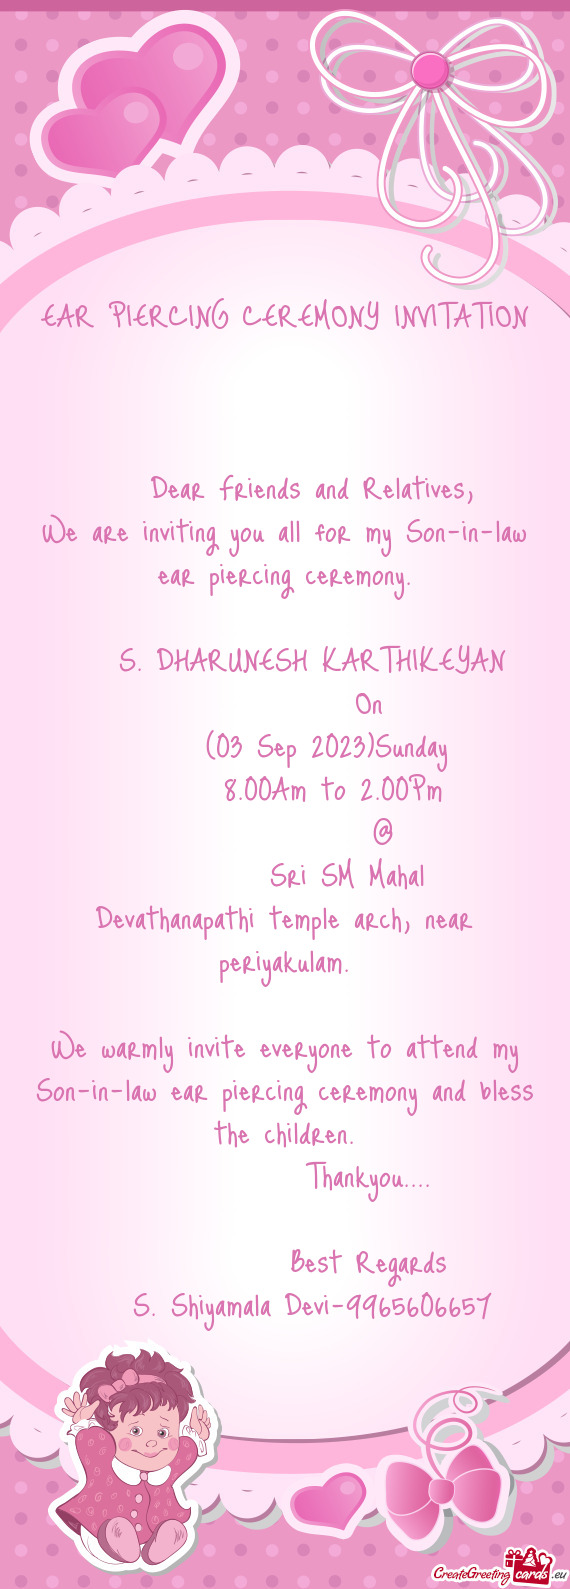 We are inviting you all for my Son-in-law ear piercing ceremony